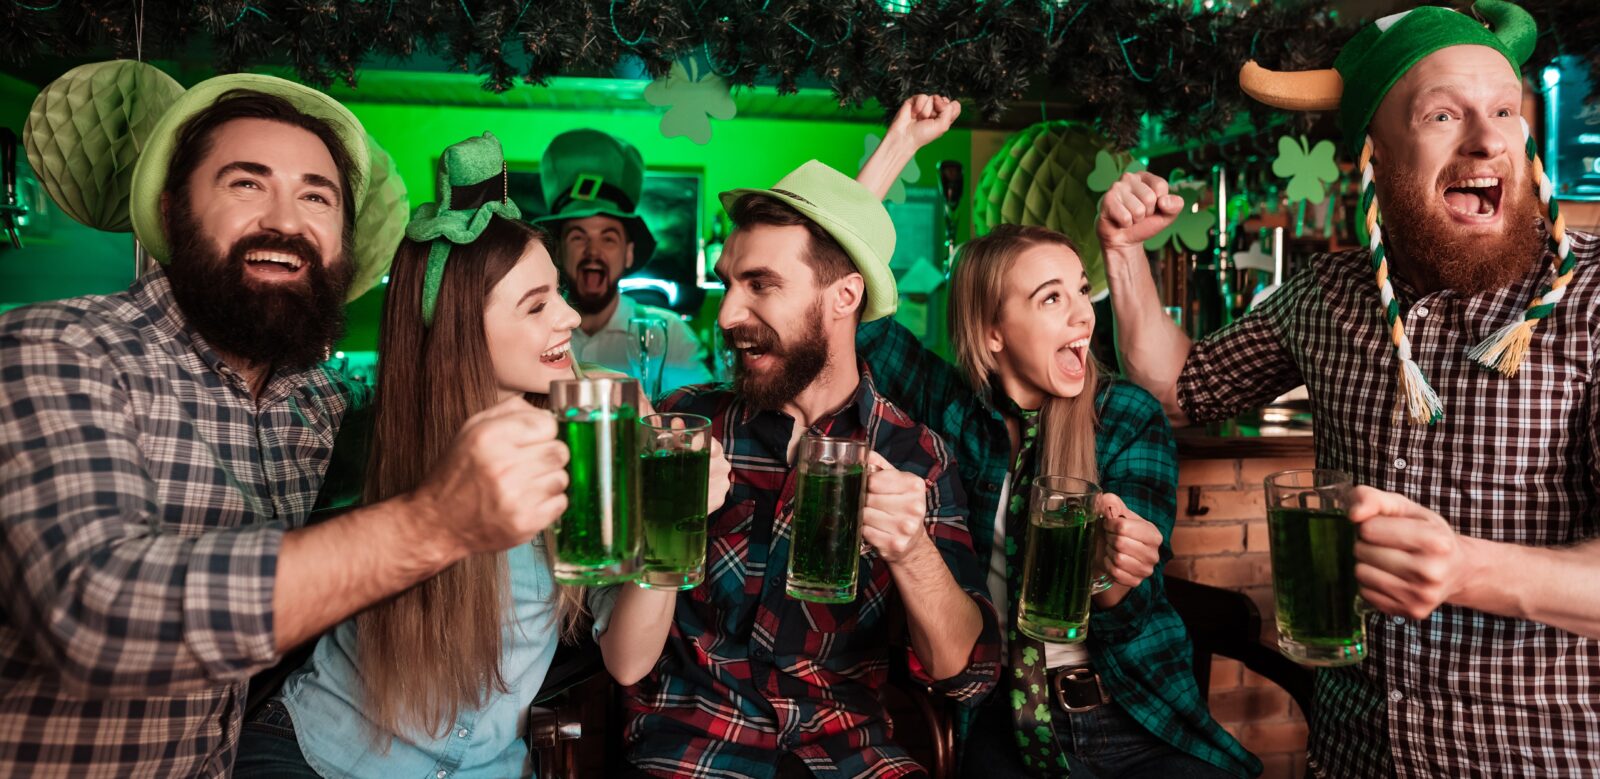 Do The Almost St. Patty’s Day Crawl in Long Beach!